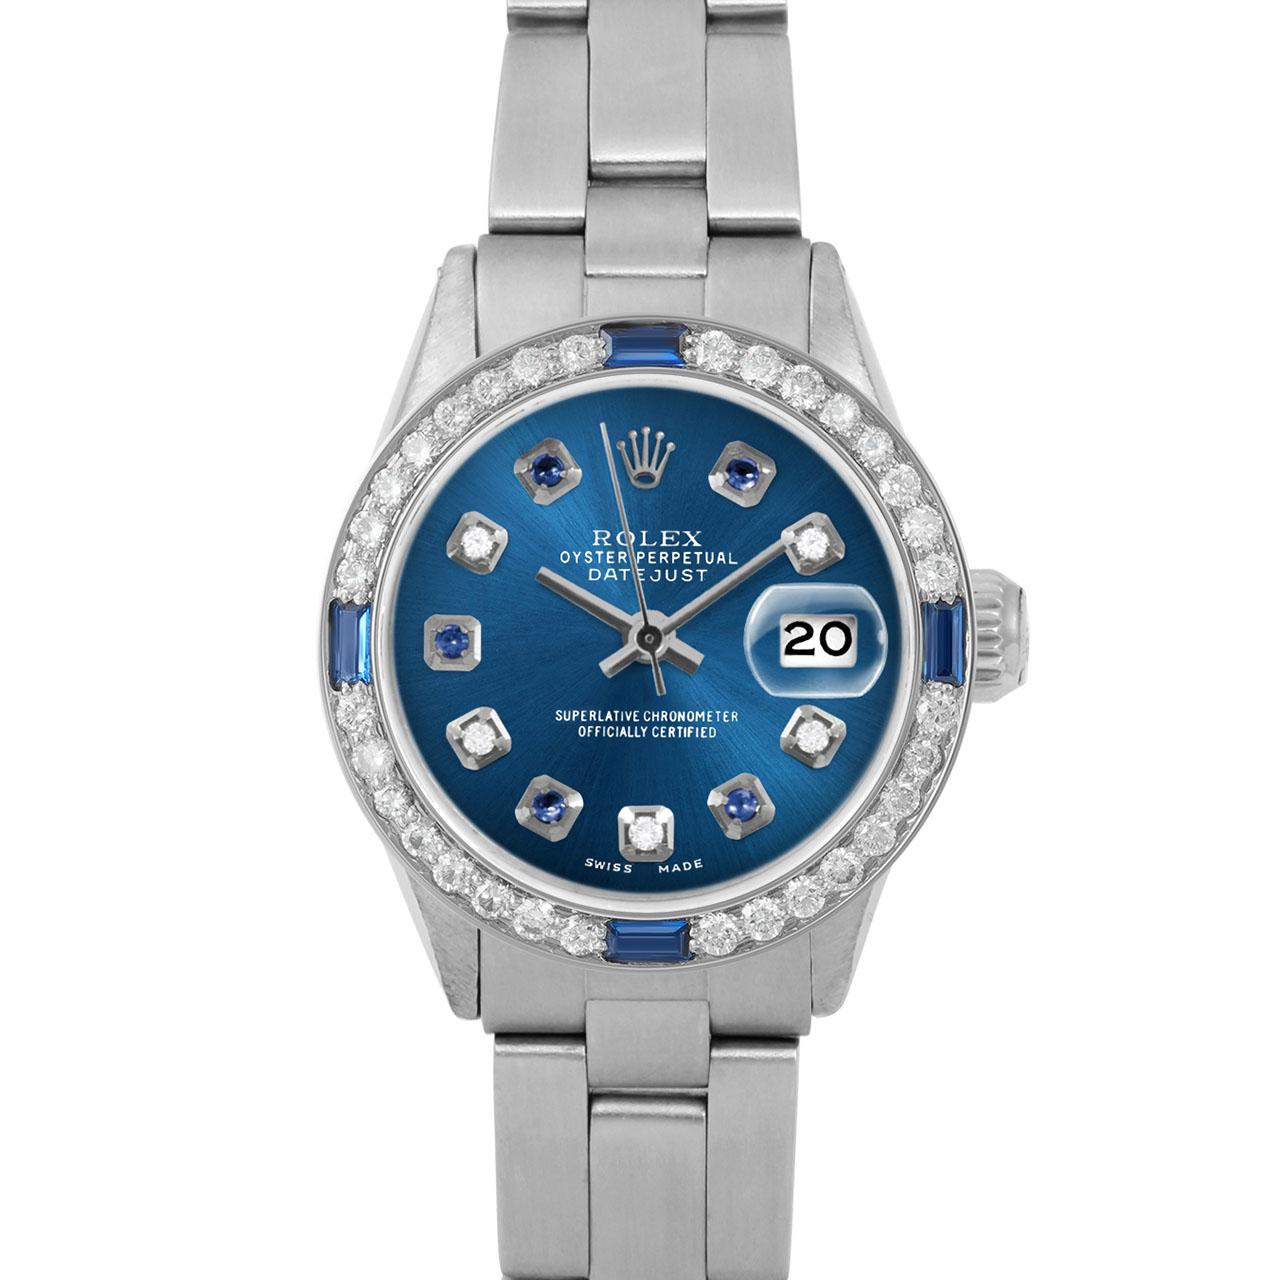 Brand : Rolex
Model : Datejust (Non-Quickset Model)
Gender : Ladies
Metals : Stainless Steel
Case Size : 24 mm

Dial : Custom Blue Diamond Sapphire Dial (This dial is not original Rolex And has been added aftermarket yet is a beautiful Custom